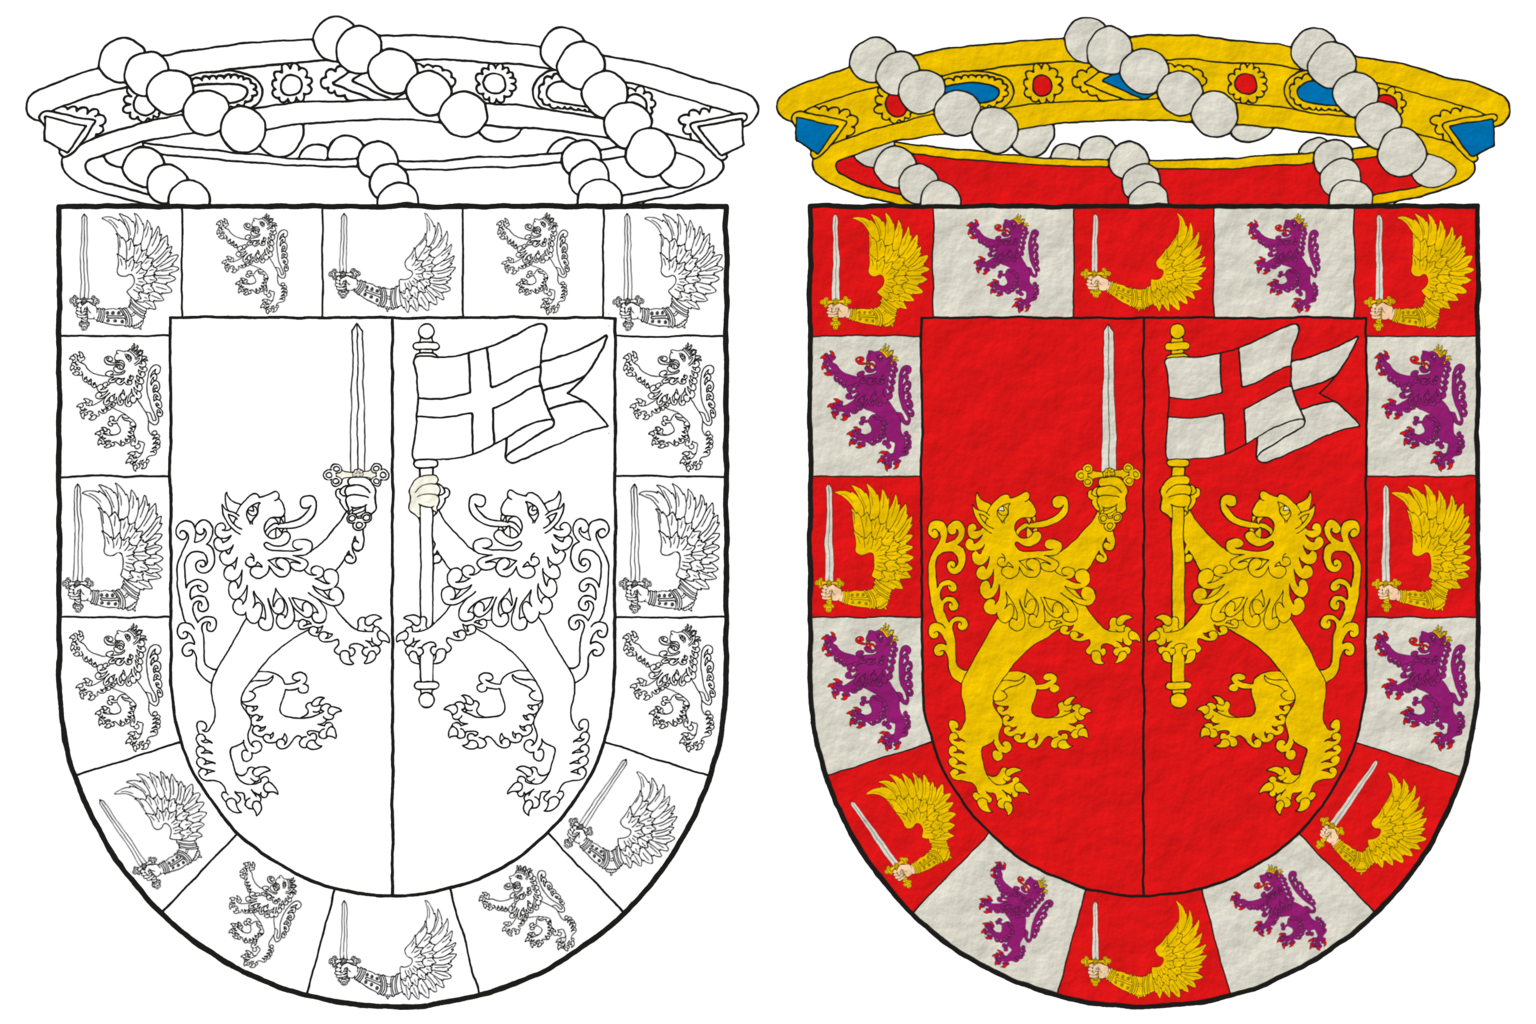 Coat of arms of Emanuele Di Culcasi, Italy, emblazoned by my under the directions of Alfonso Ceballos-Escalera Gila, Cronista de Armas de Castilla y León. The image shows the evolution of my artwork in 2 stages outlined, and plain tinctures.